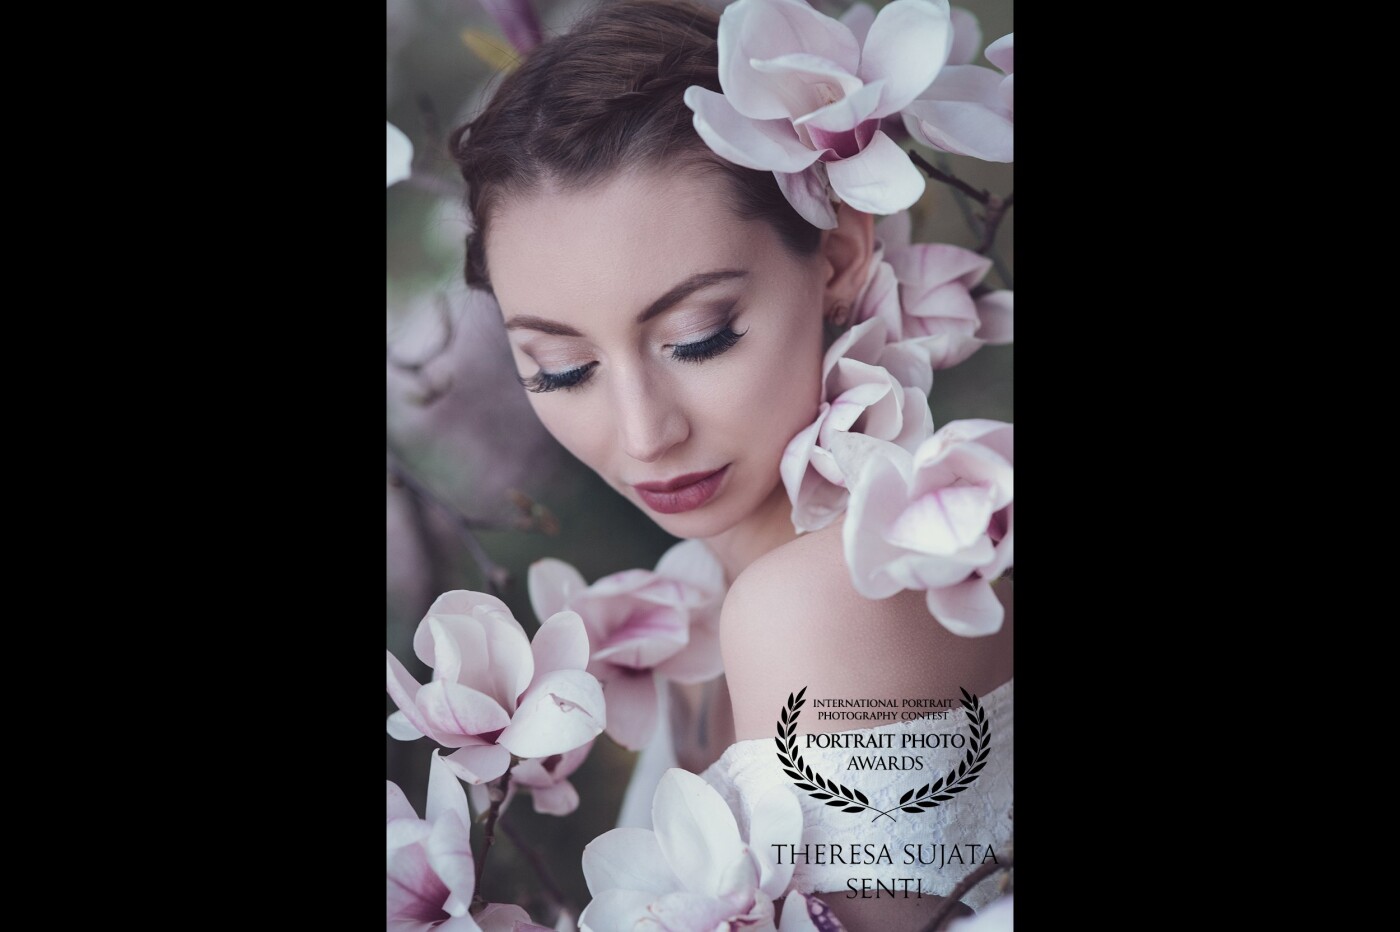 I met with Desirée after work in her garden. This beautiful magnolia tree was standing there, in full bloom. It was almost dusk and the wind was also rather cold but we decided to do a little portrait session anyway. No regrets. <br />
Photographer: SujARTa / Theresa Sujata Senti<br />
https://www.facebook.com/SujARTa.Photography<br />
https://www.instagram.com/SujARTa.Photography/<br />
Model: Desirée Didouche<br />
https://www.facebook.com/Kosmetik.Visagistin/<br />
https://www.instagram.com/desiree_jessica/<br />
